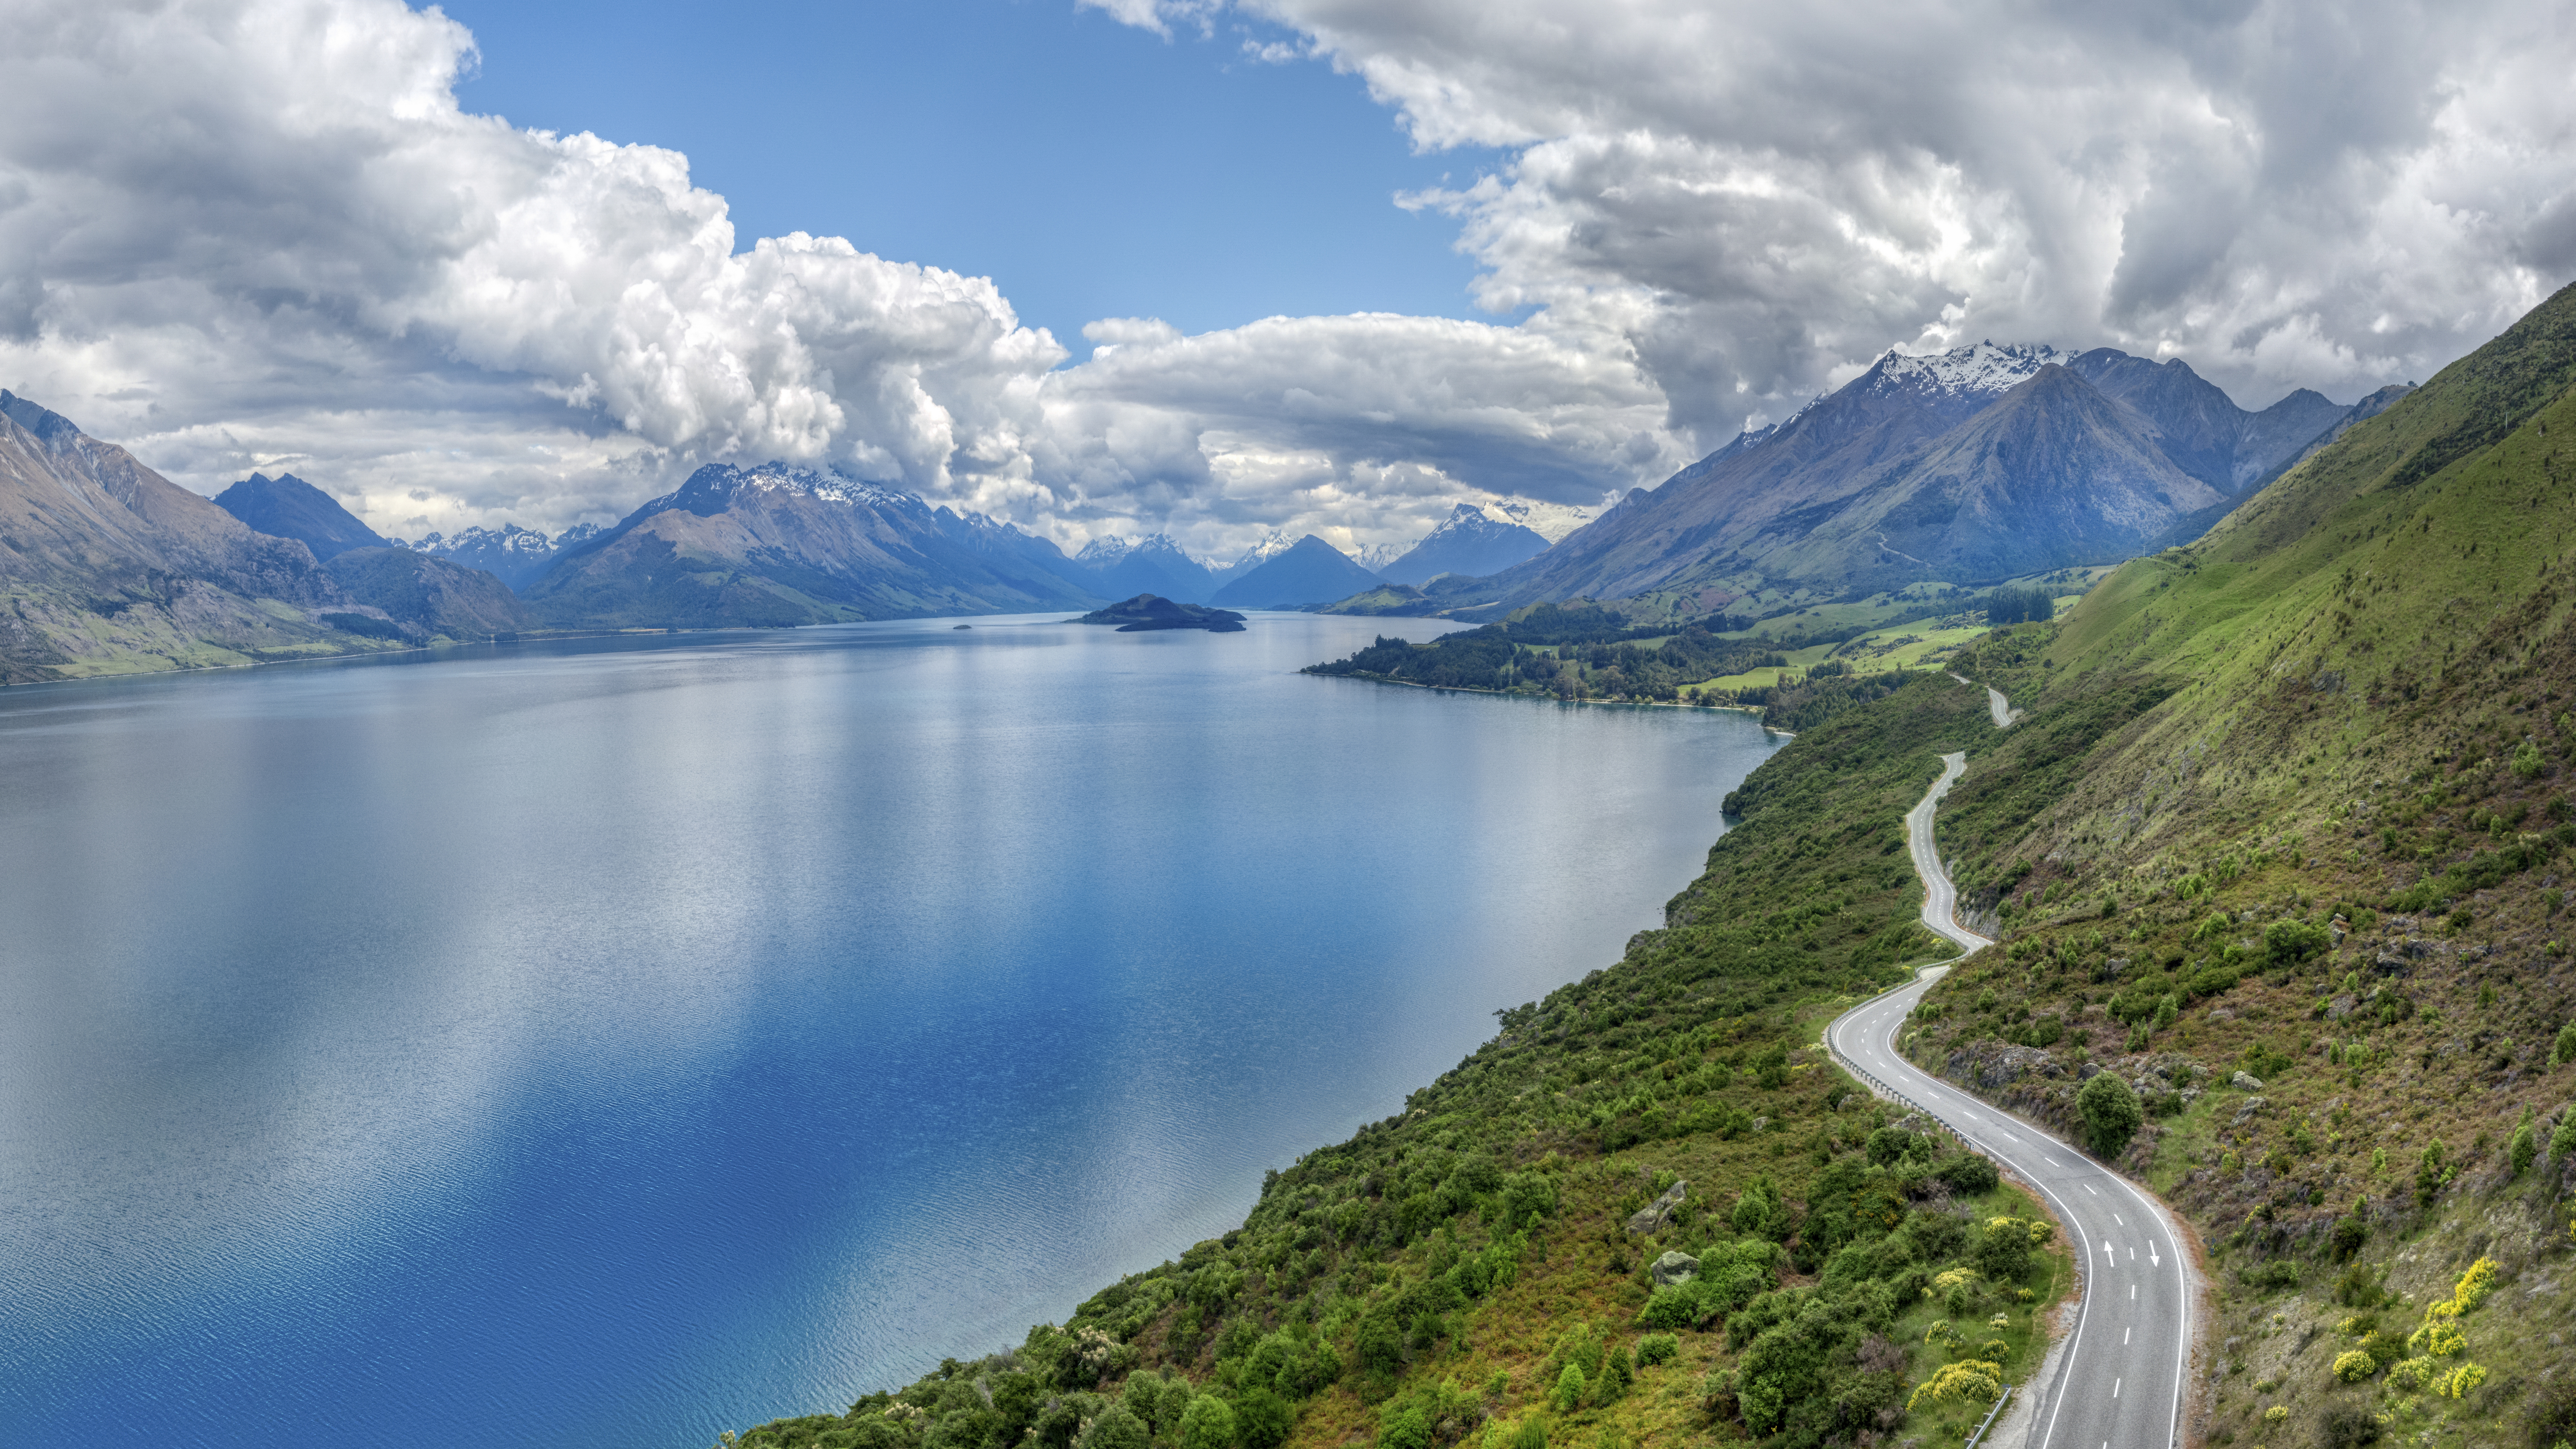 General 7680x4320 Trey Ratcliff photography New Zealand Glenorchy Queenstown clouds water mountains nature road